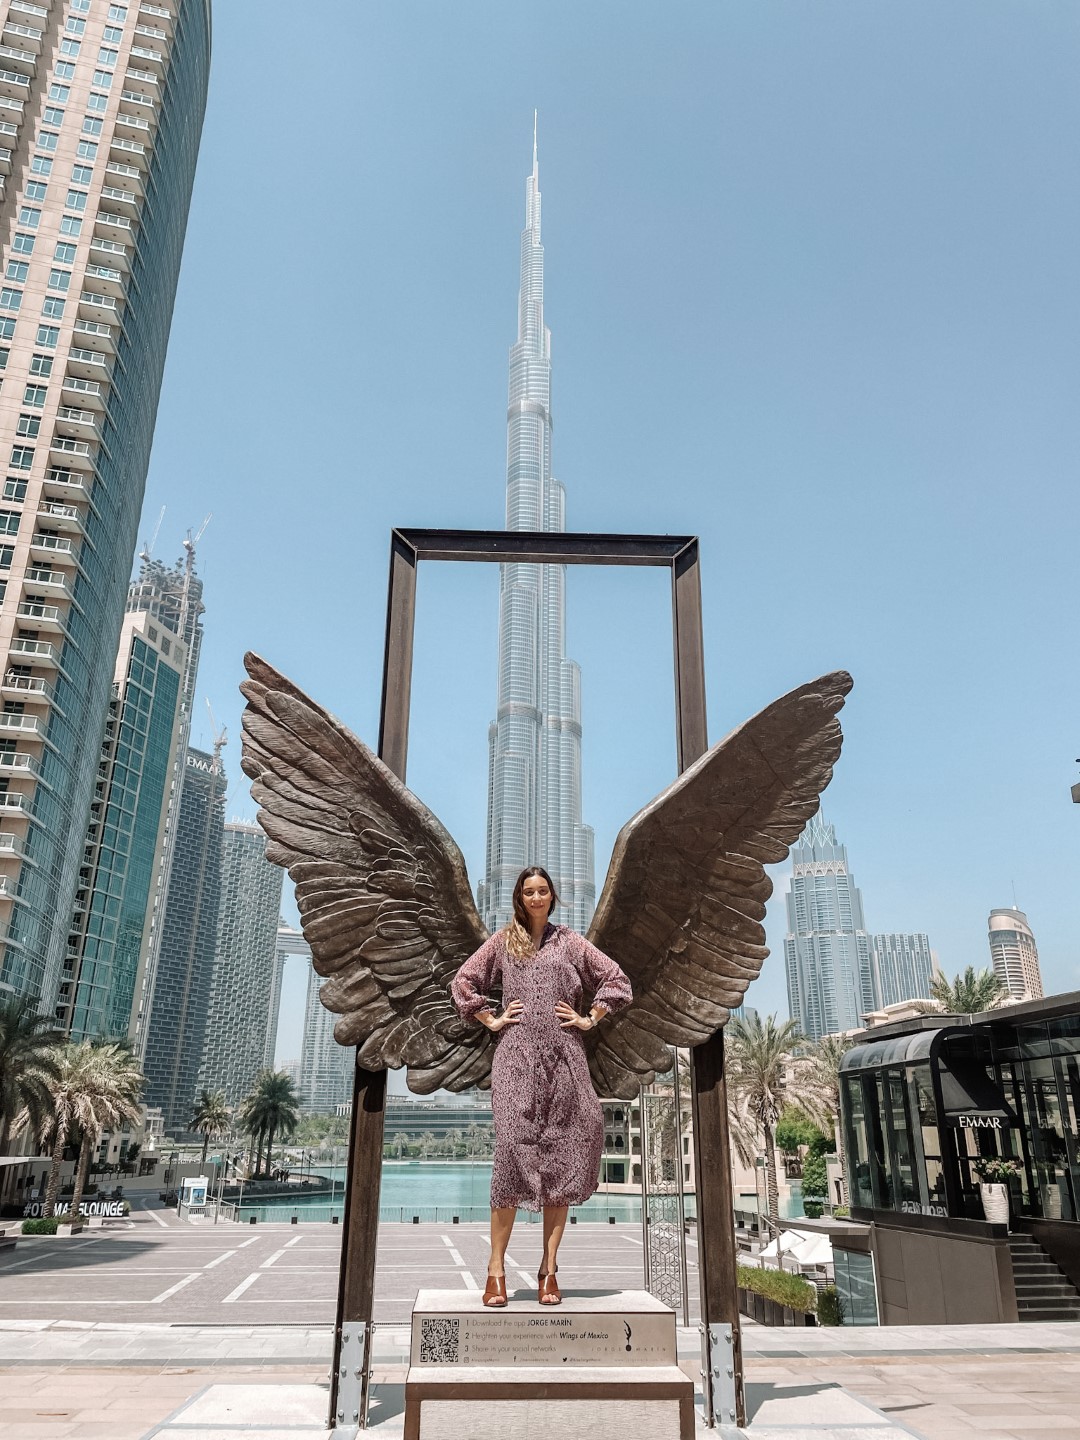 Image of a woman in front of the Burj Khalifa, inserted in a post about the best things to do in Dubai.